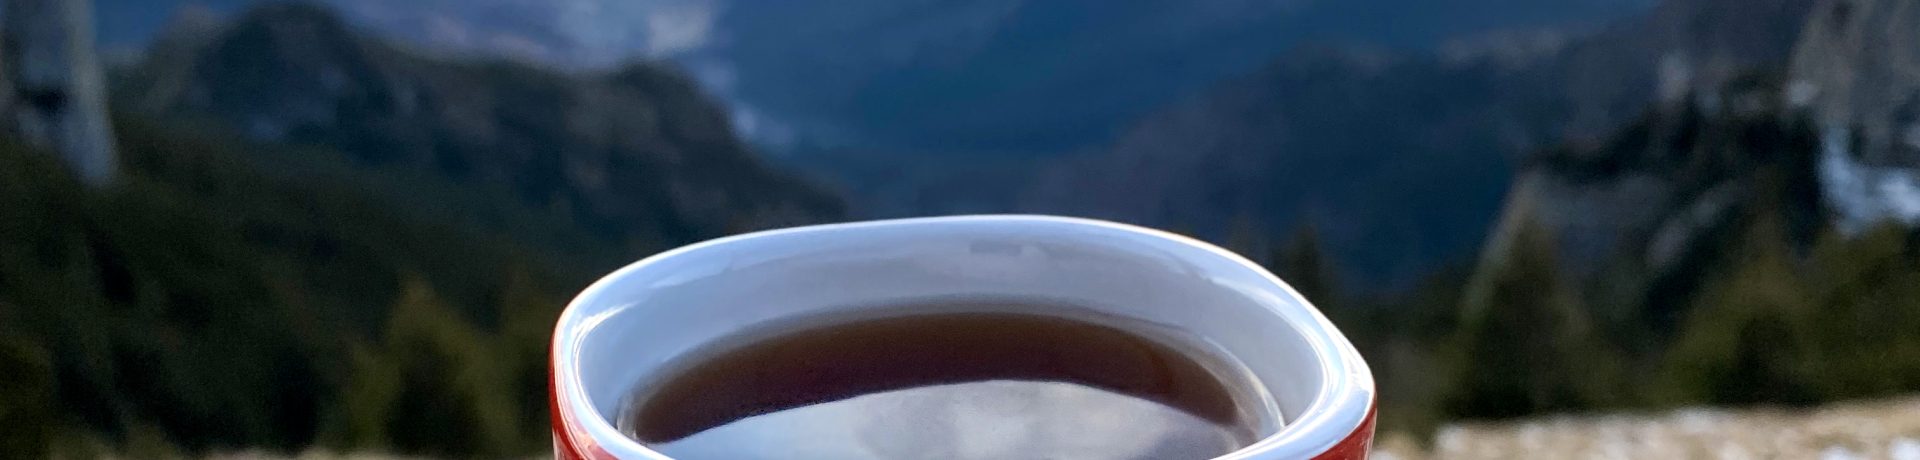 A cup of coffee on the Toaca peak in the Carpathians at sunset, Romania